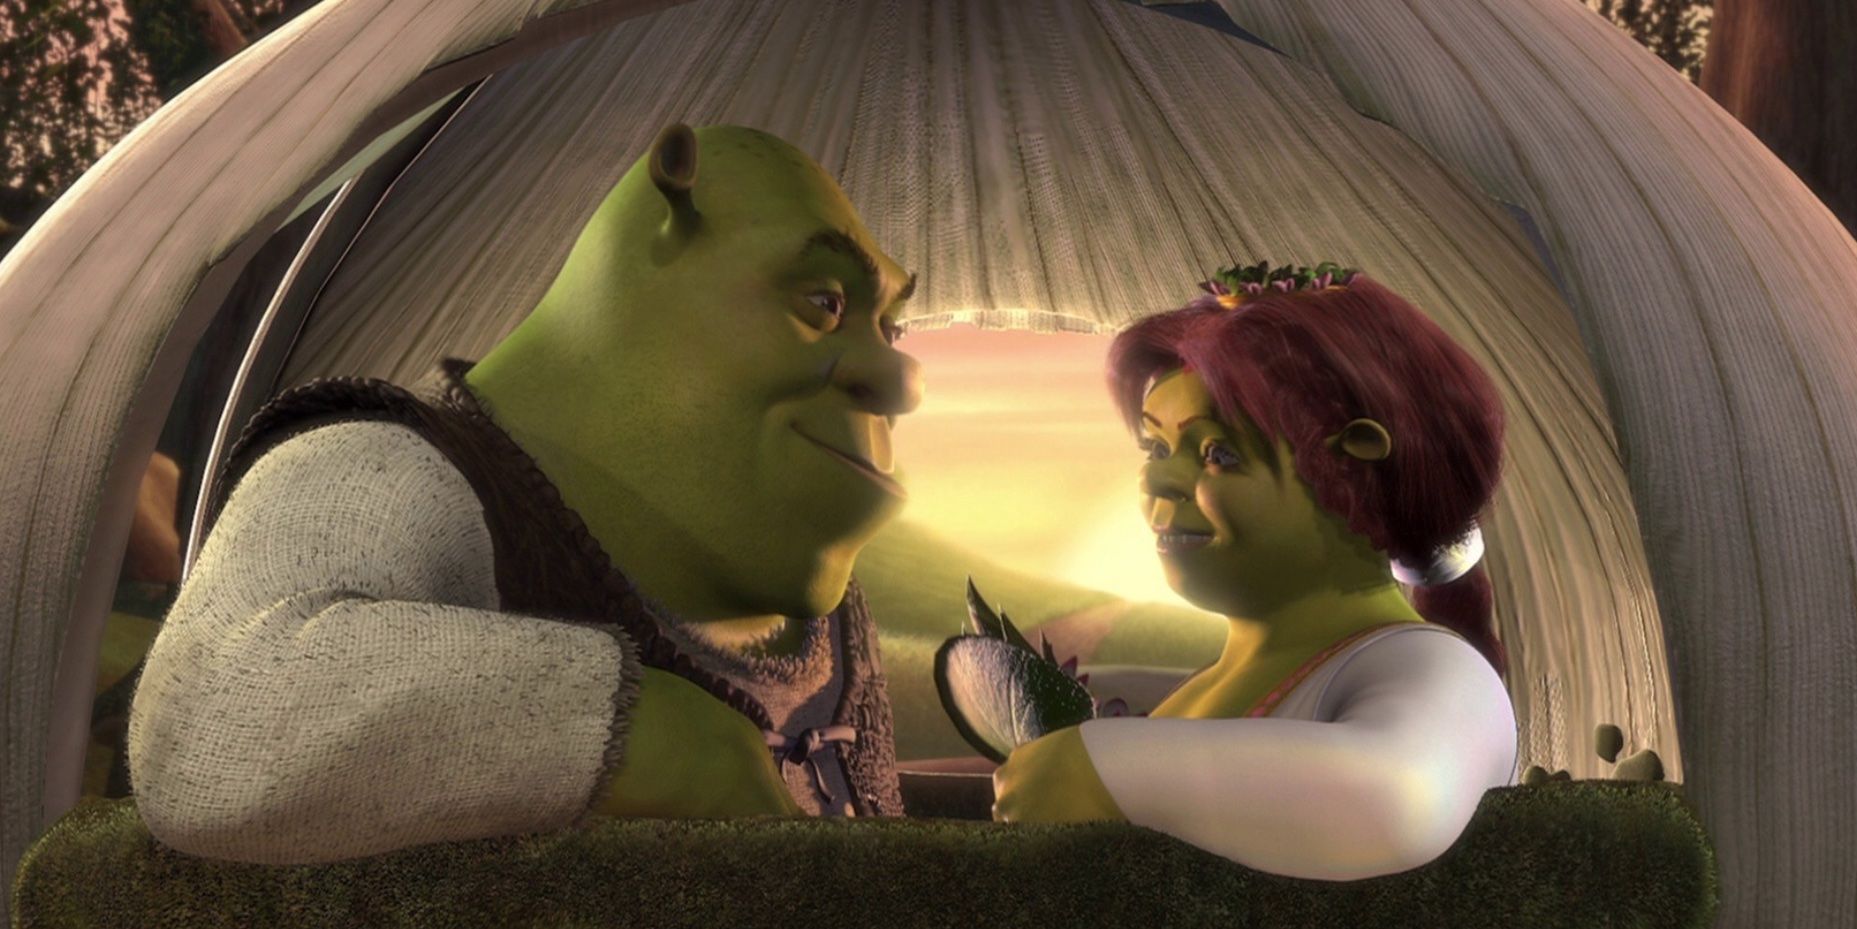 Cameron Diaz and Mike Myers voicing Fiona and Shrek in 'Shrek'